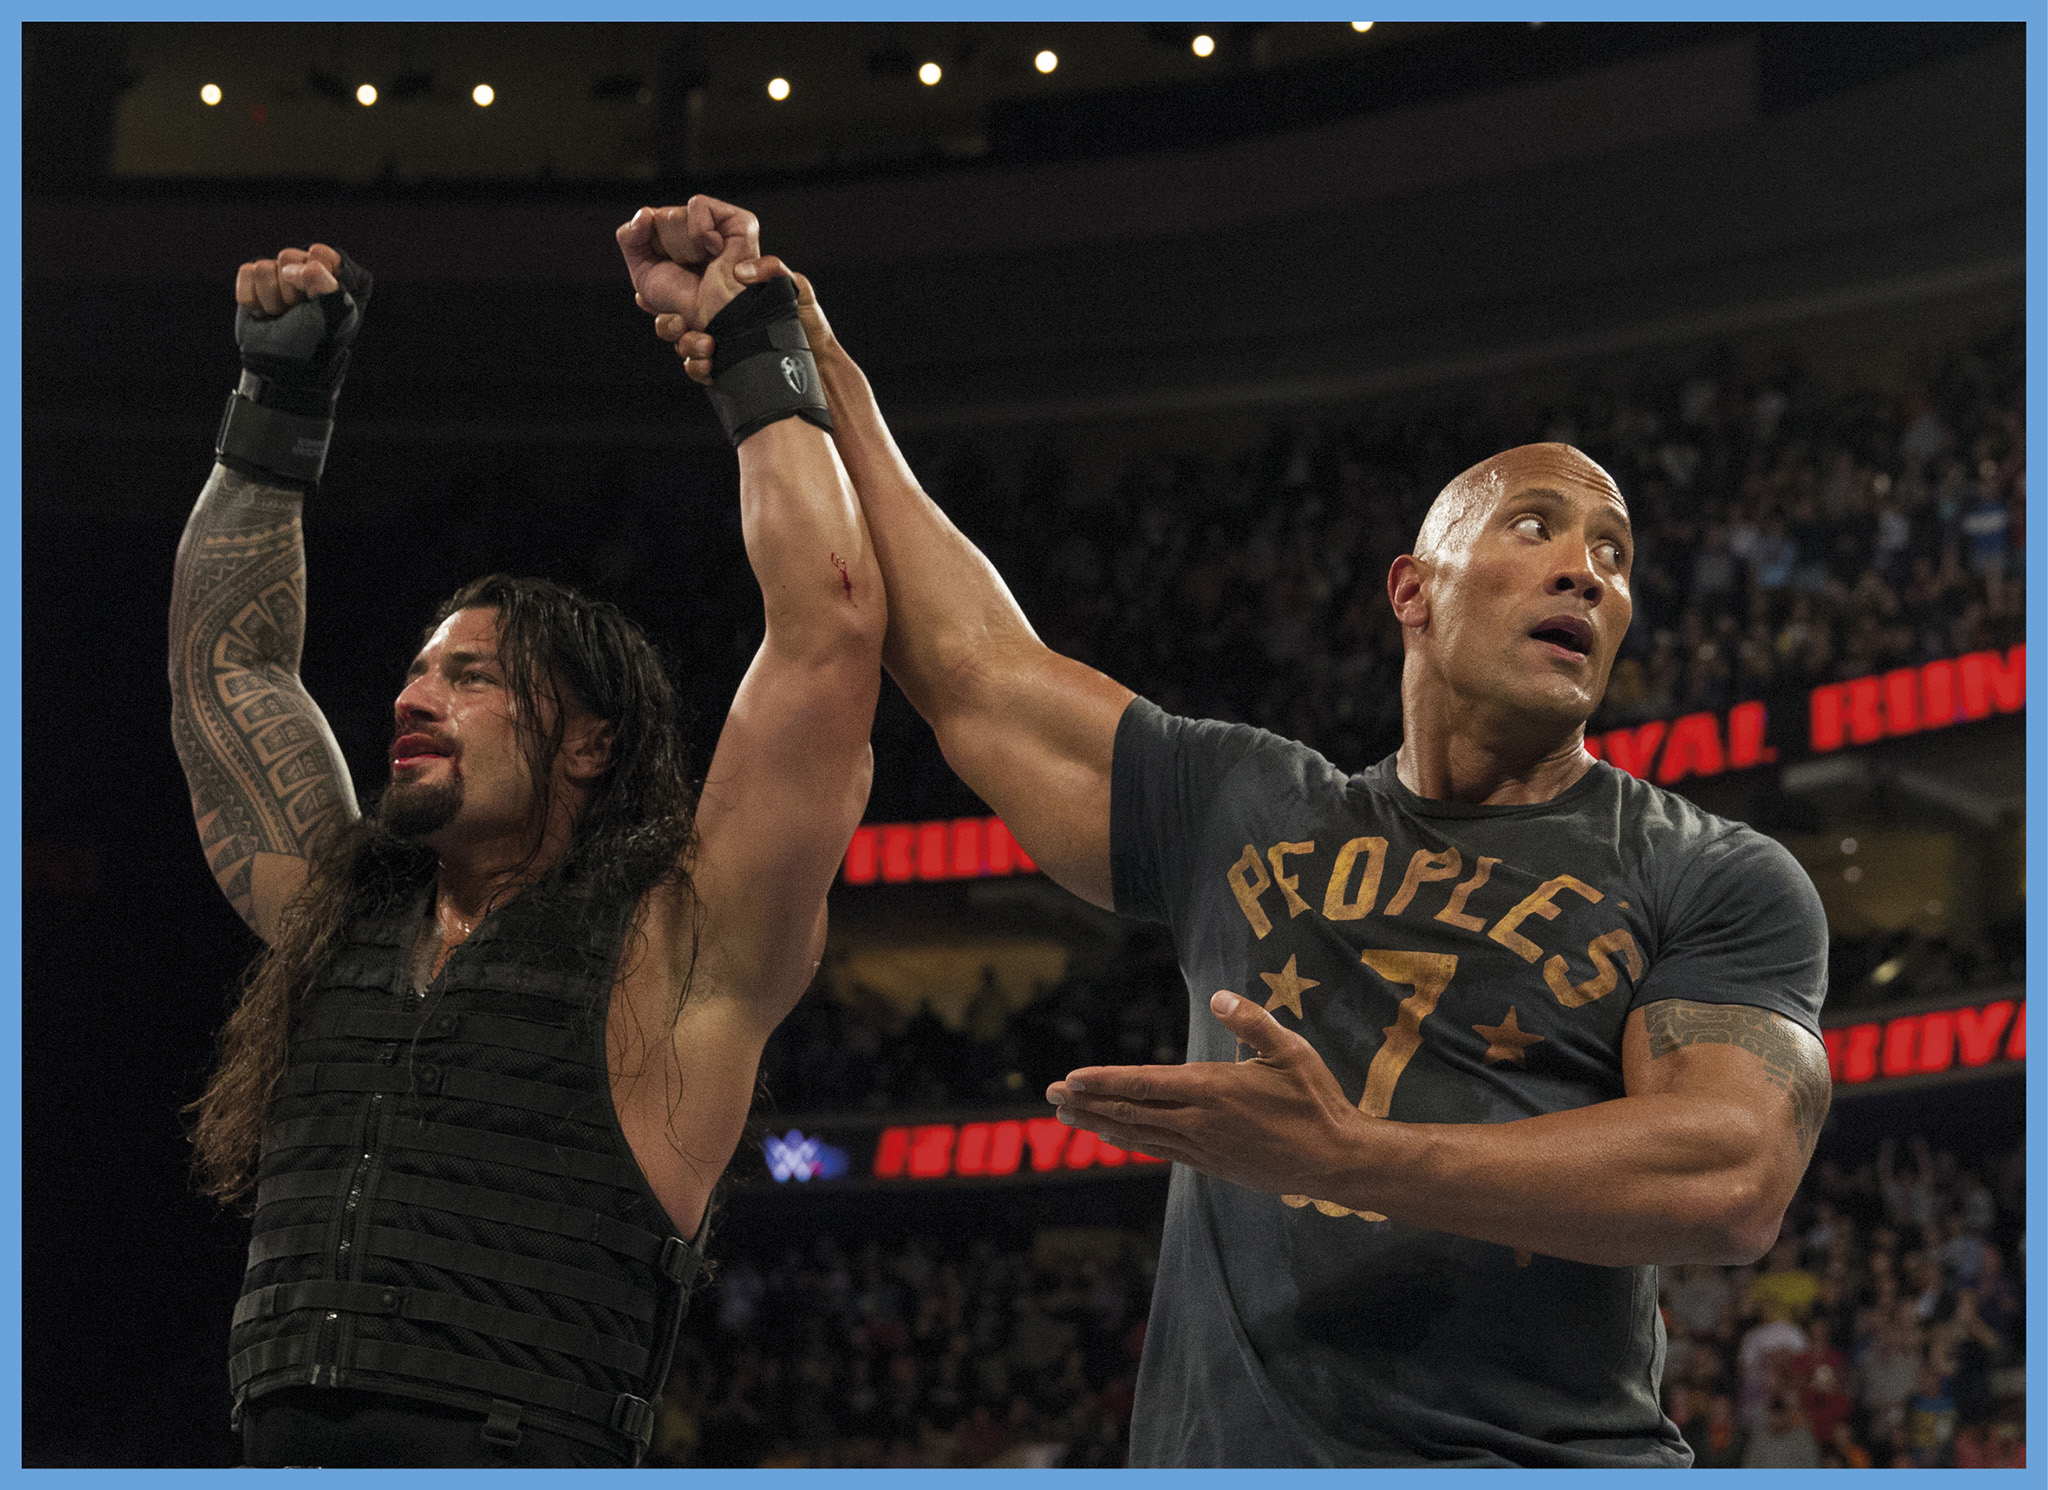 Sports entertainment is a way of life for The Rocks extended family as well - photo 6